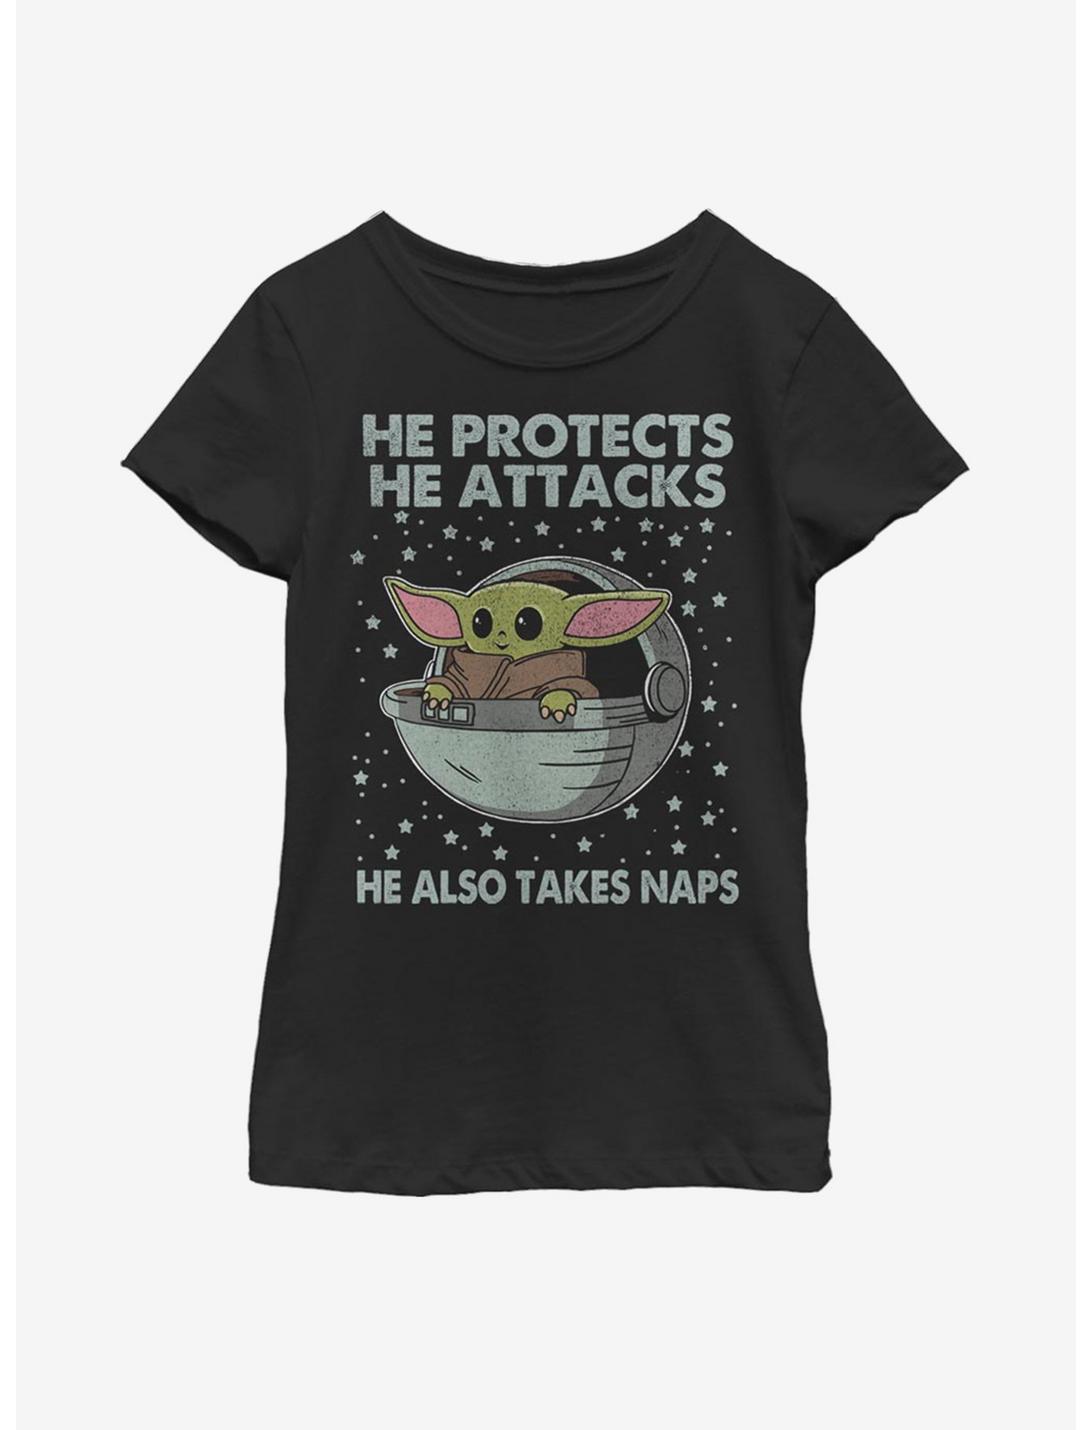 Star Wars The Mandalorian The Child Protect Attack And Nap Youth Girls T-Shirt, BLACK, hi-res